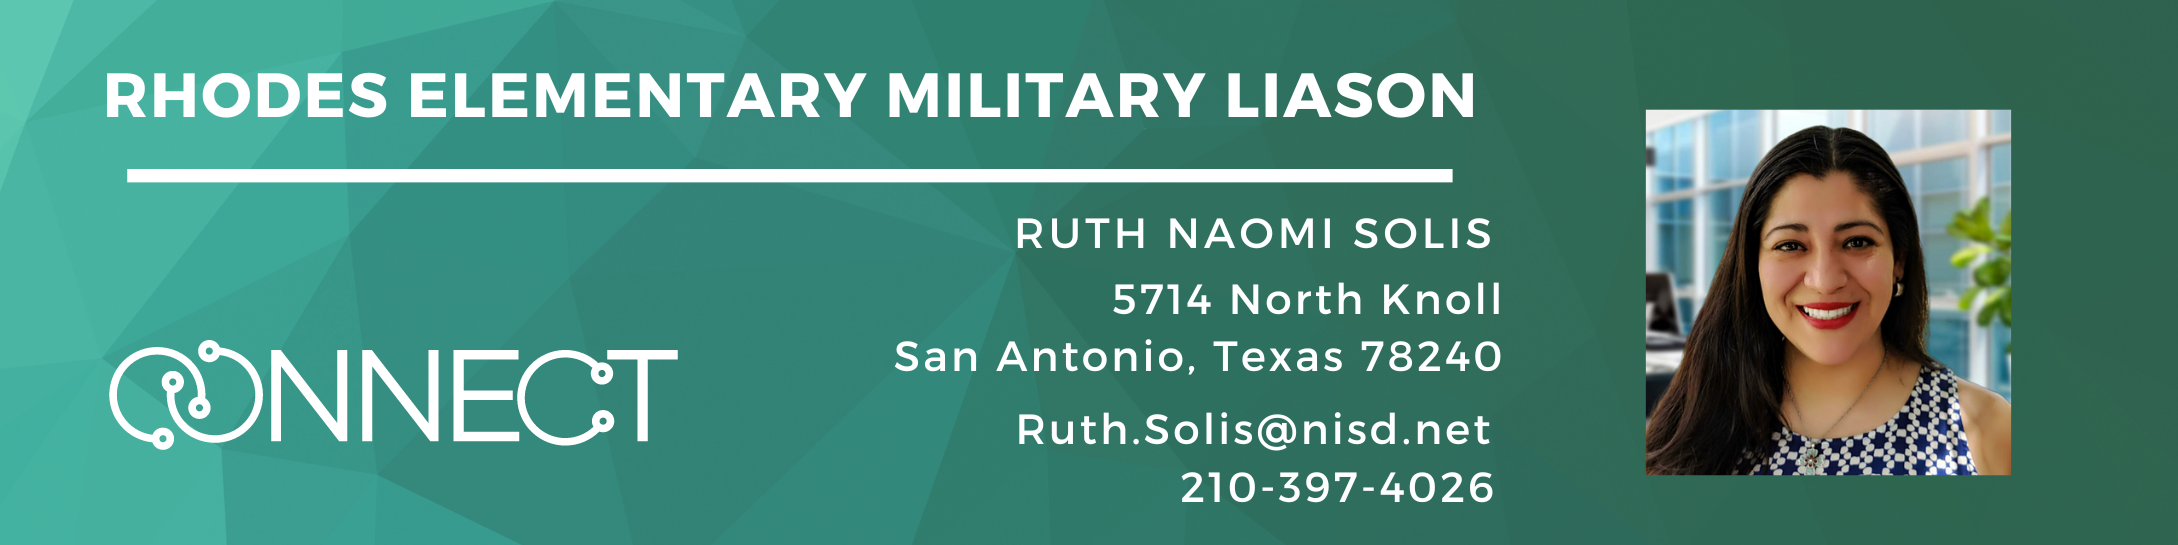 Contact information for Military Liaison which is Ruth Naomi Solis